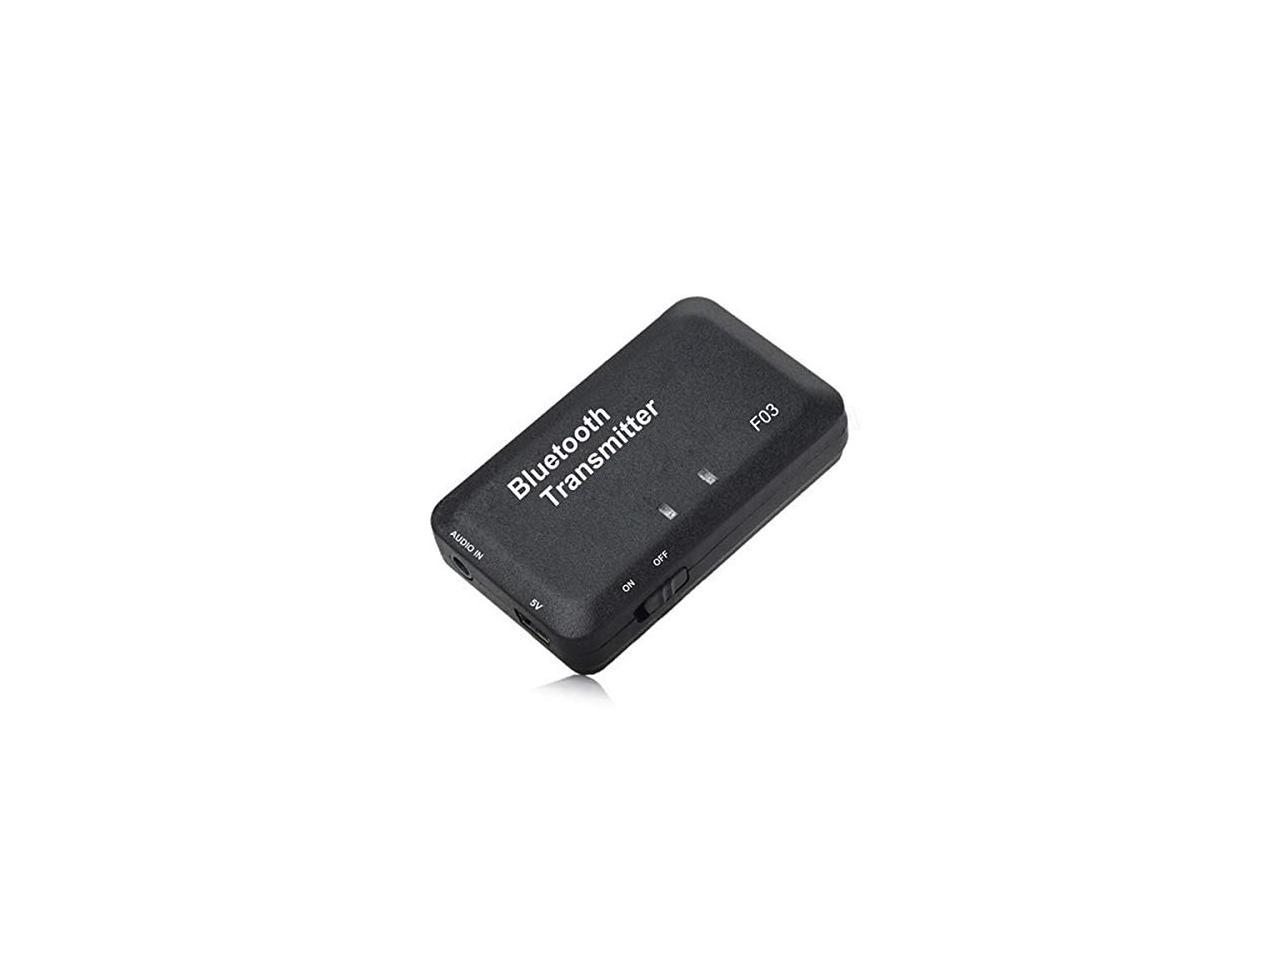 TS-BT35F03 Multi-point Bluetooth Audio Transmitter for Headset Smart TV MP3 VMF 